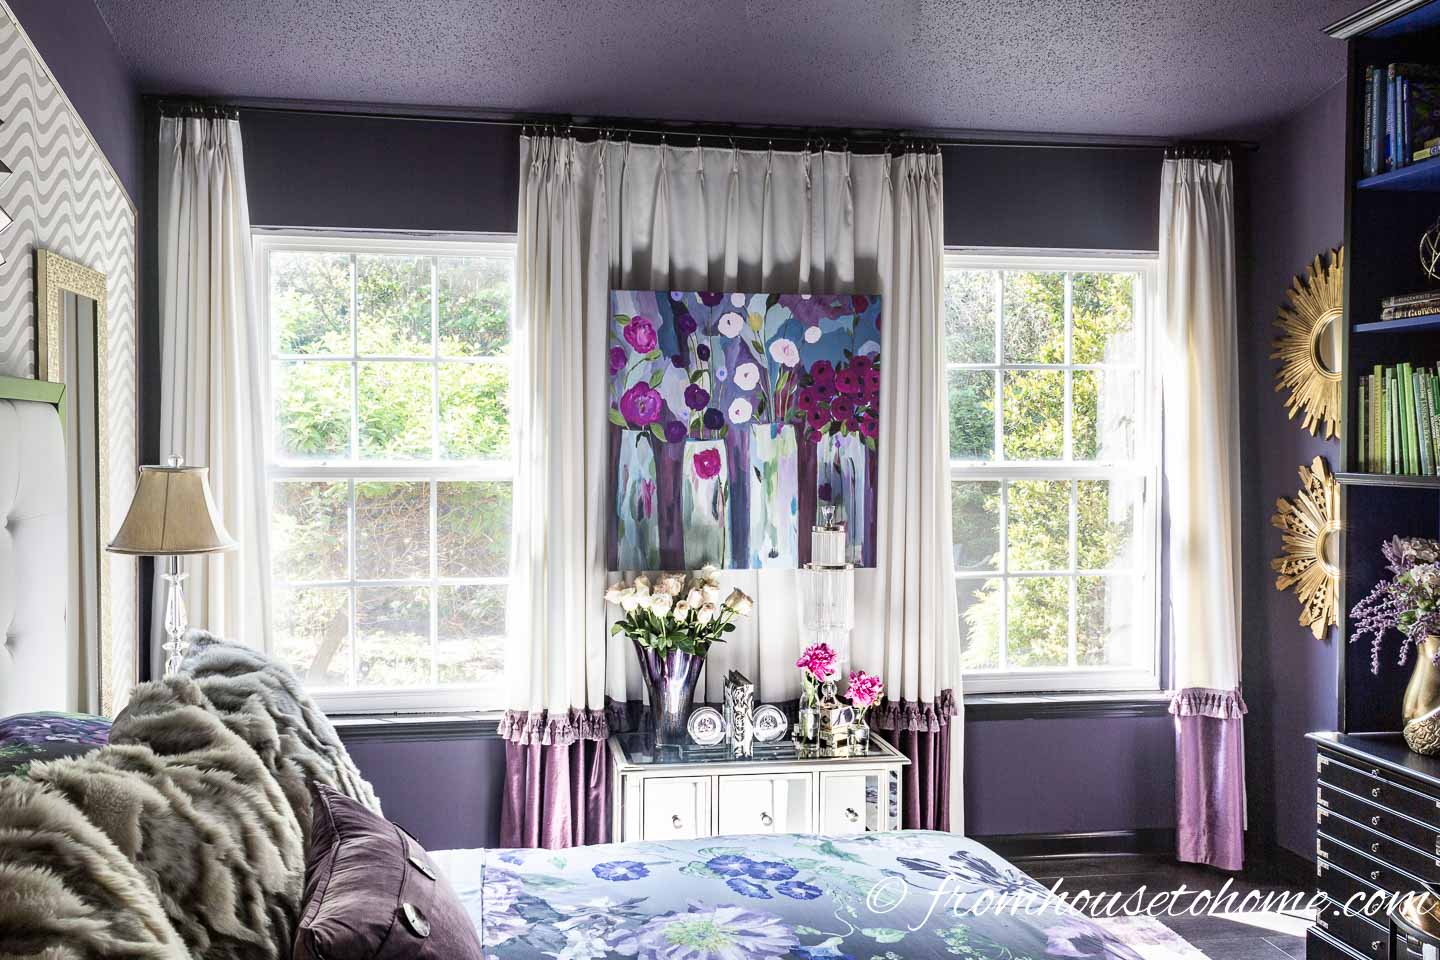 Wall to wall, floor to ceiling curtains in a bedroom